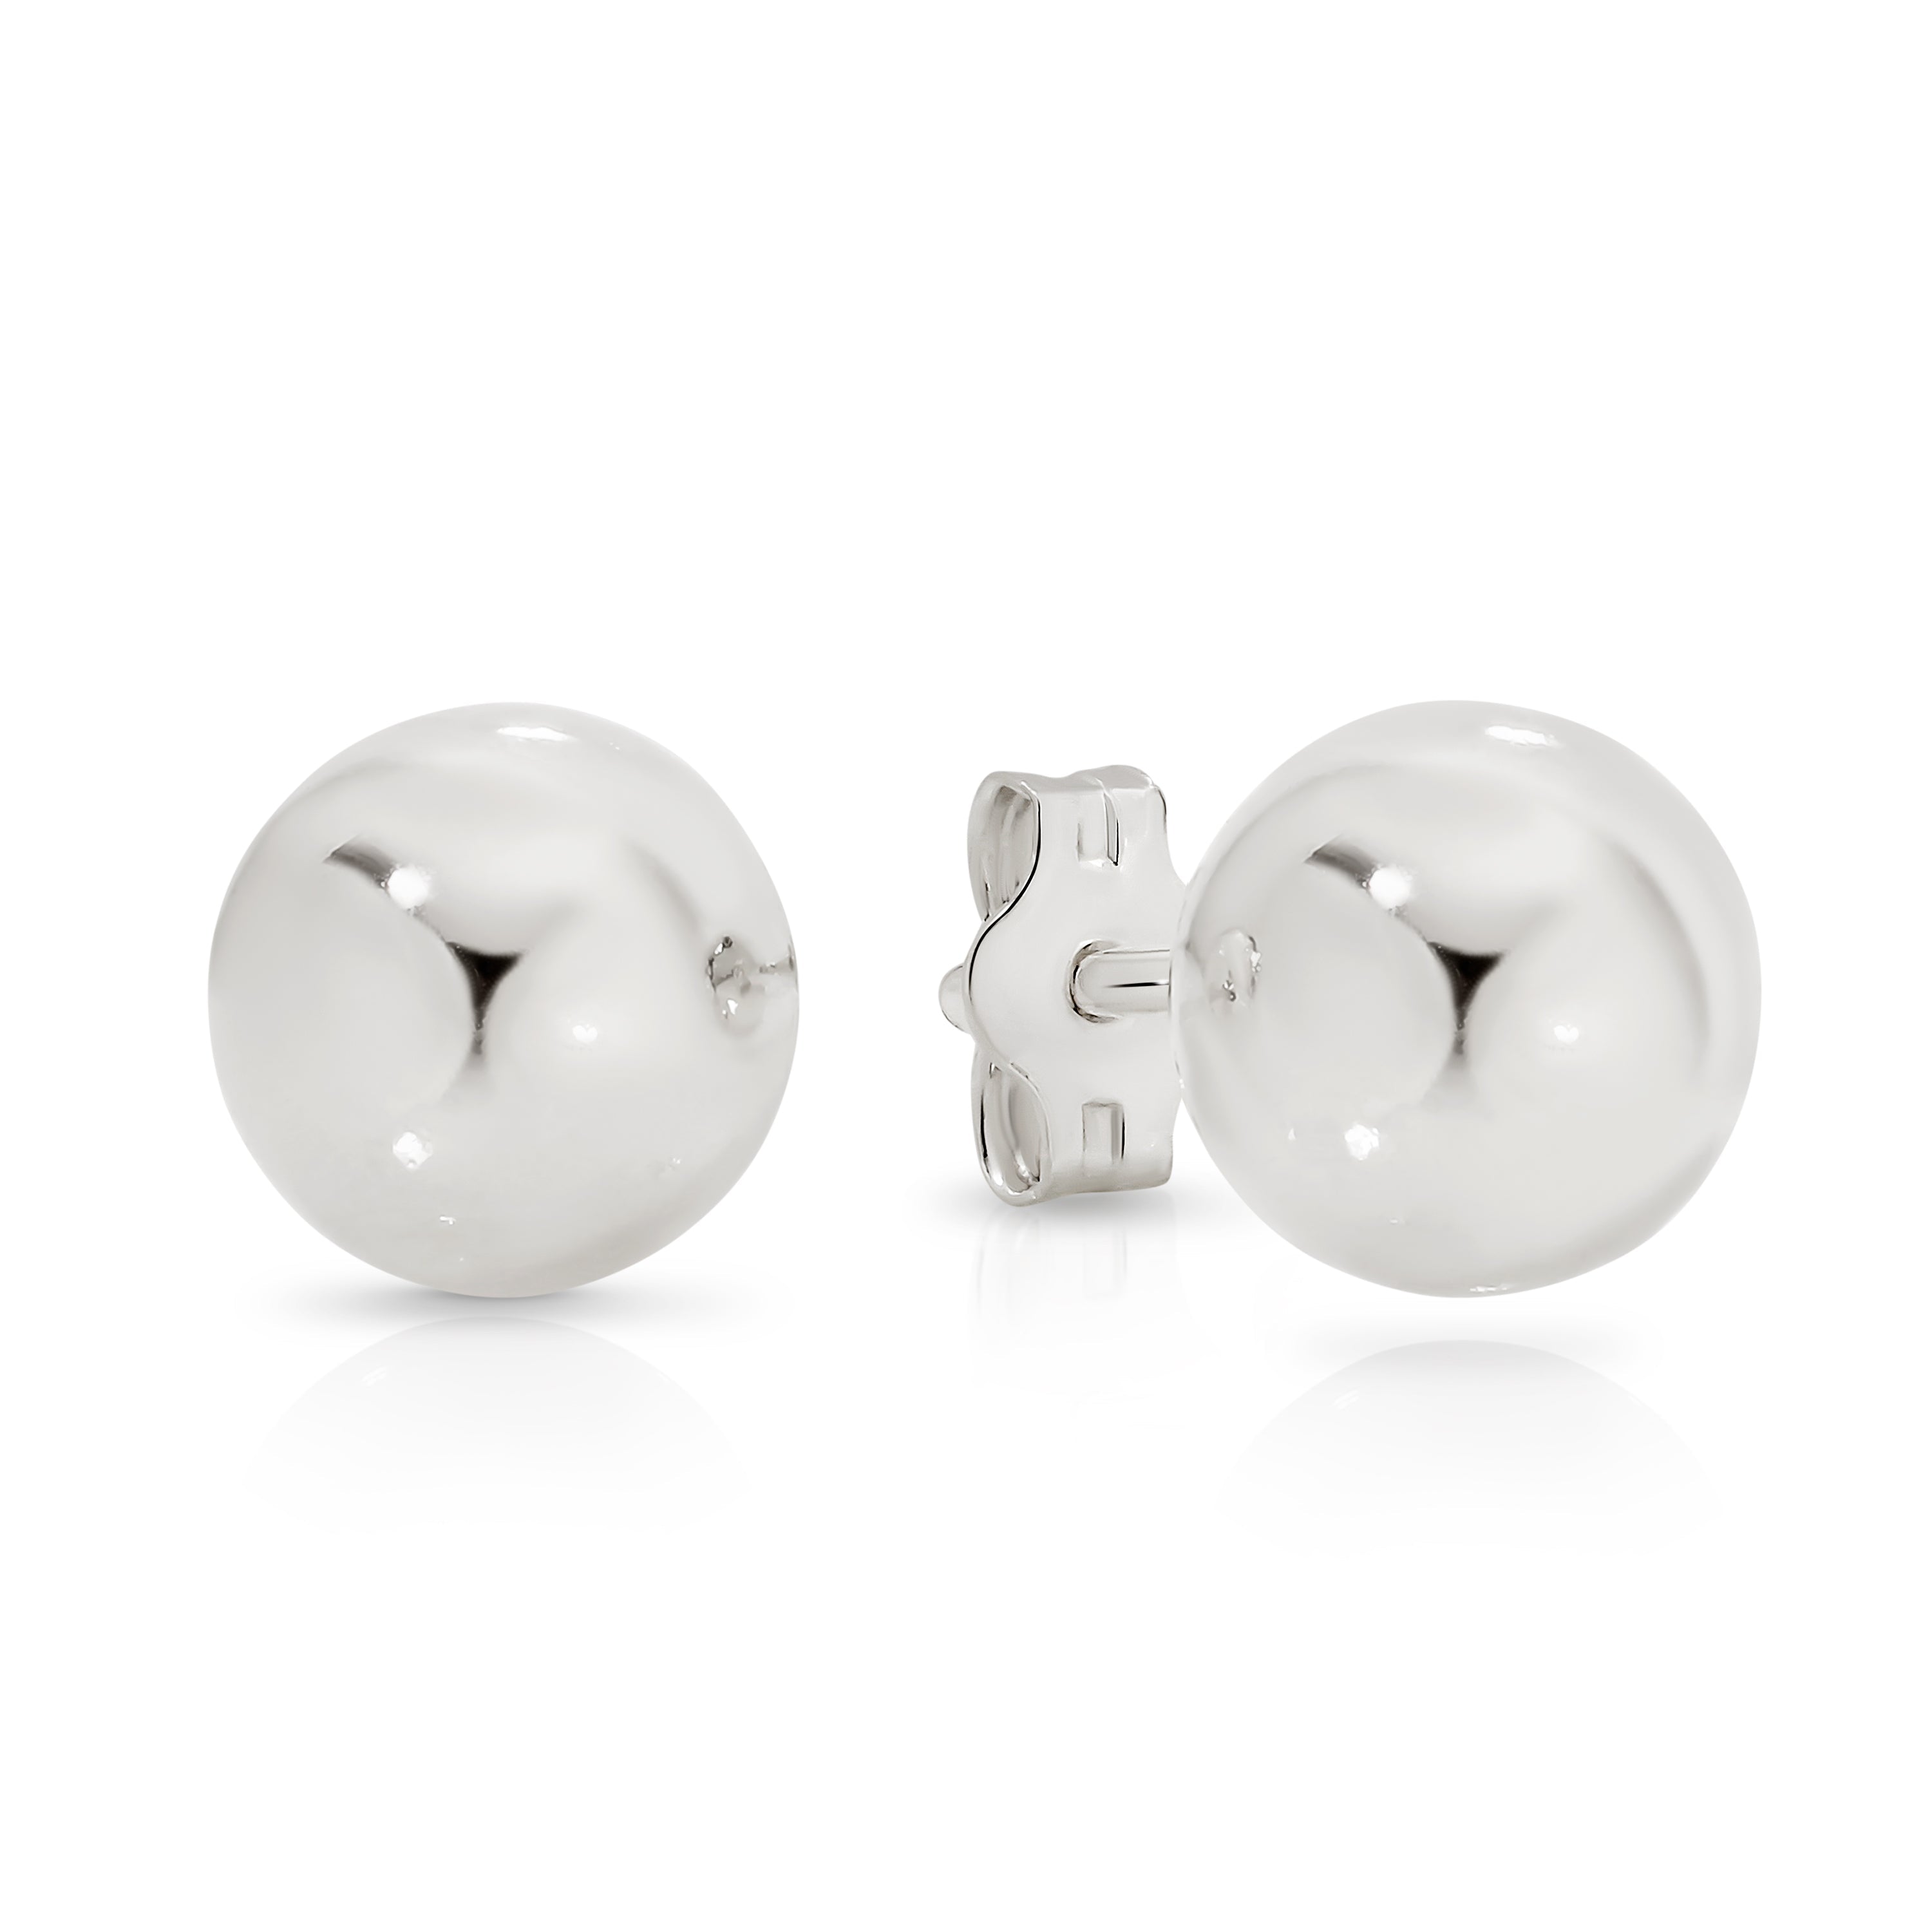 Silver polished 8mm ball studs